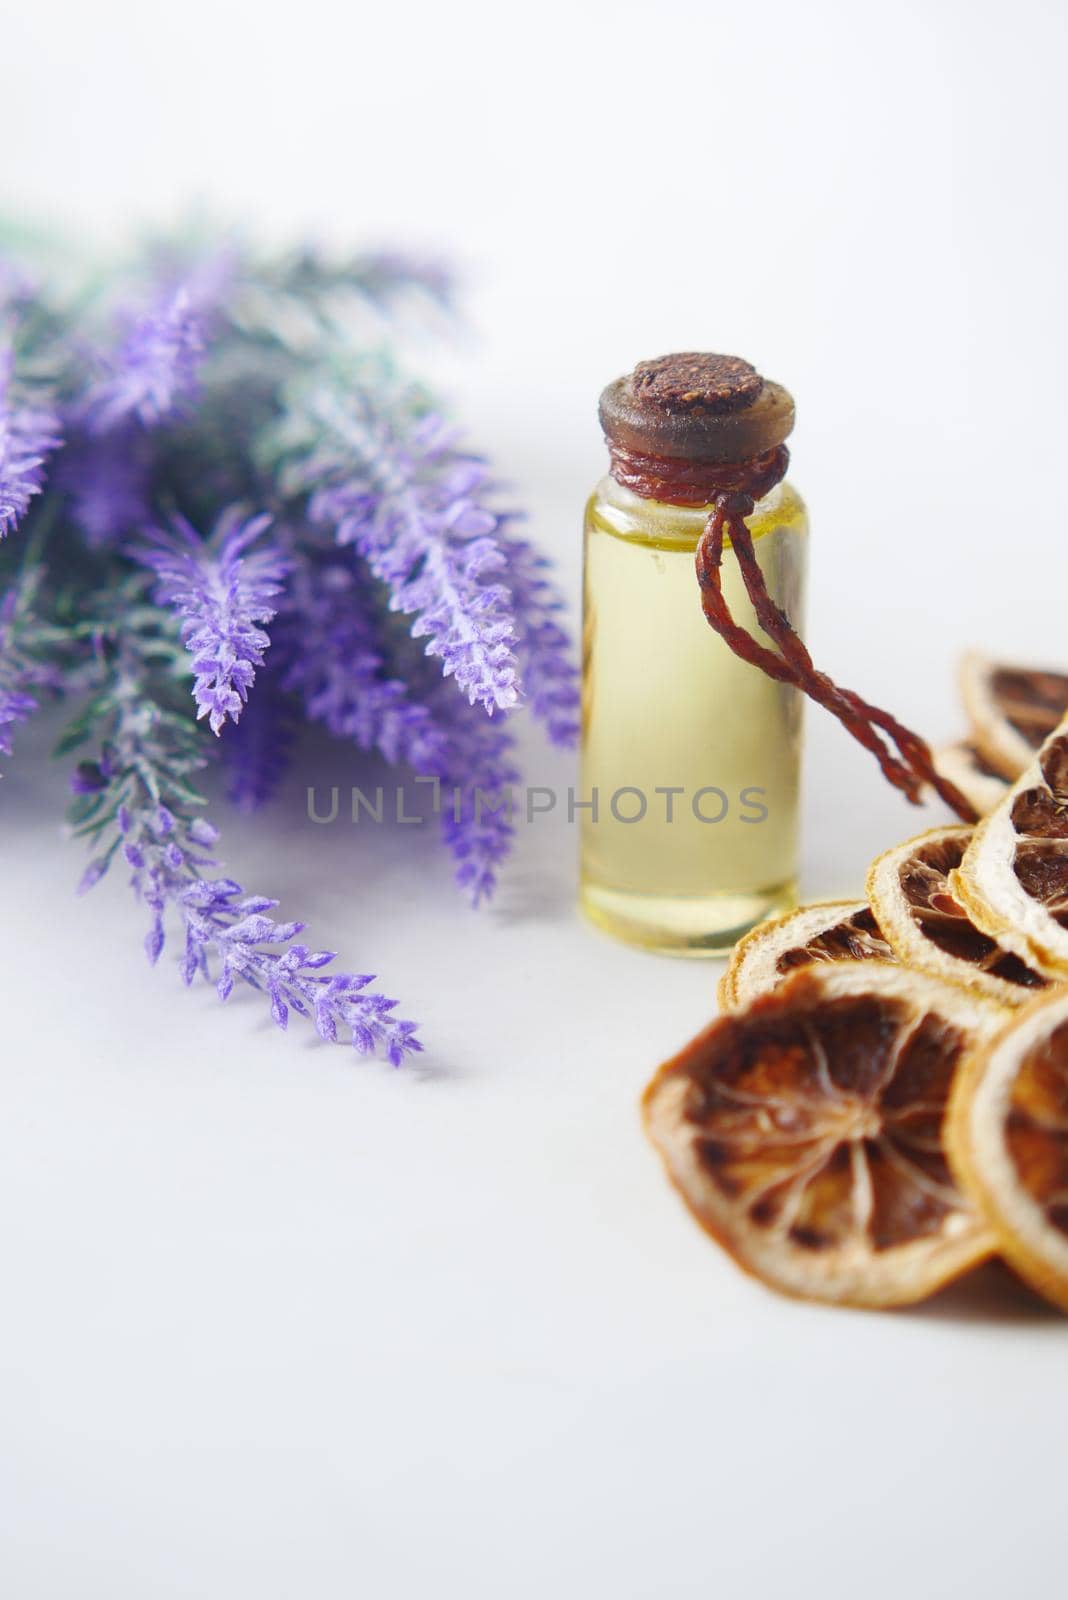 Essential lavender oil and flowers on table with copy space .